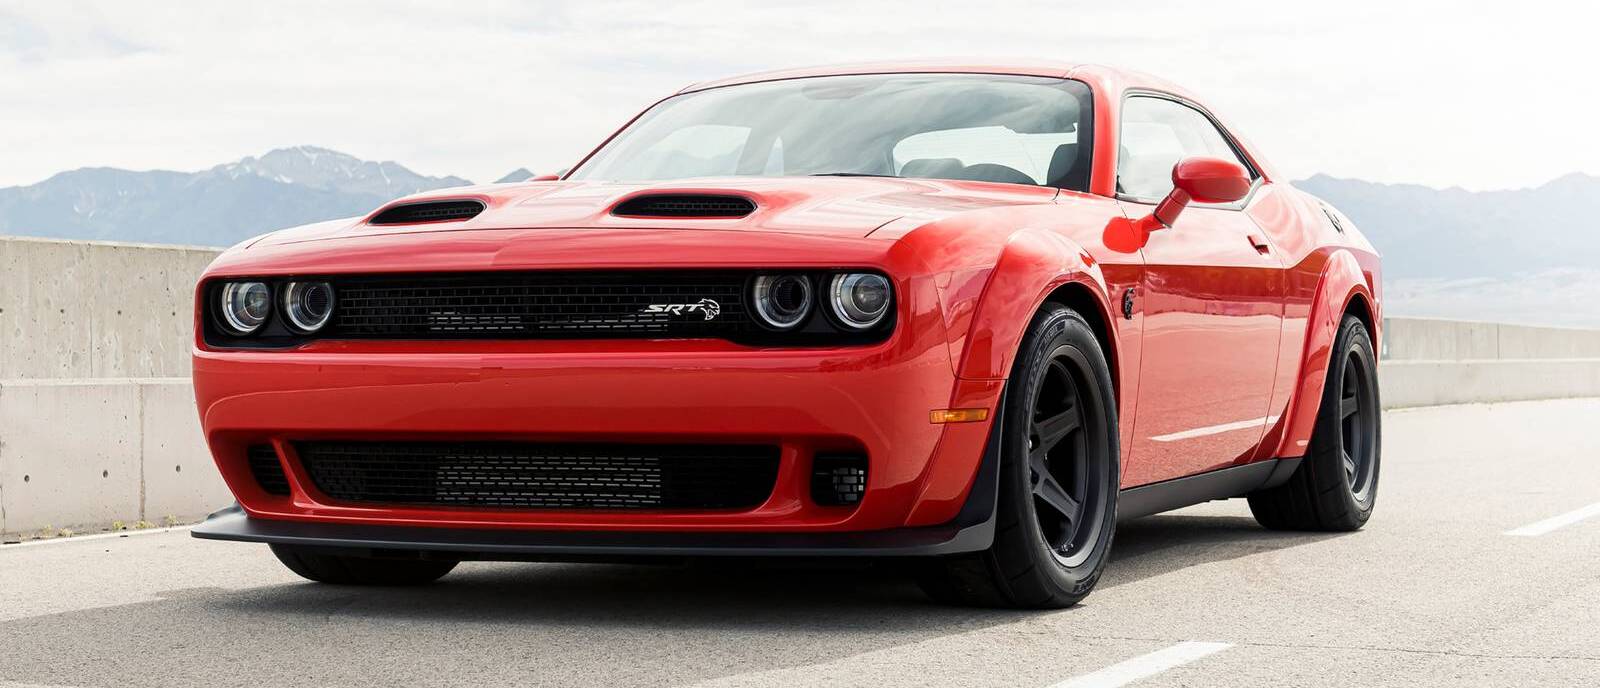 Summer Auto Parts are for Dodge Challenger water tank seals